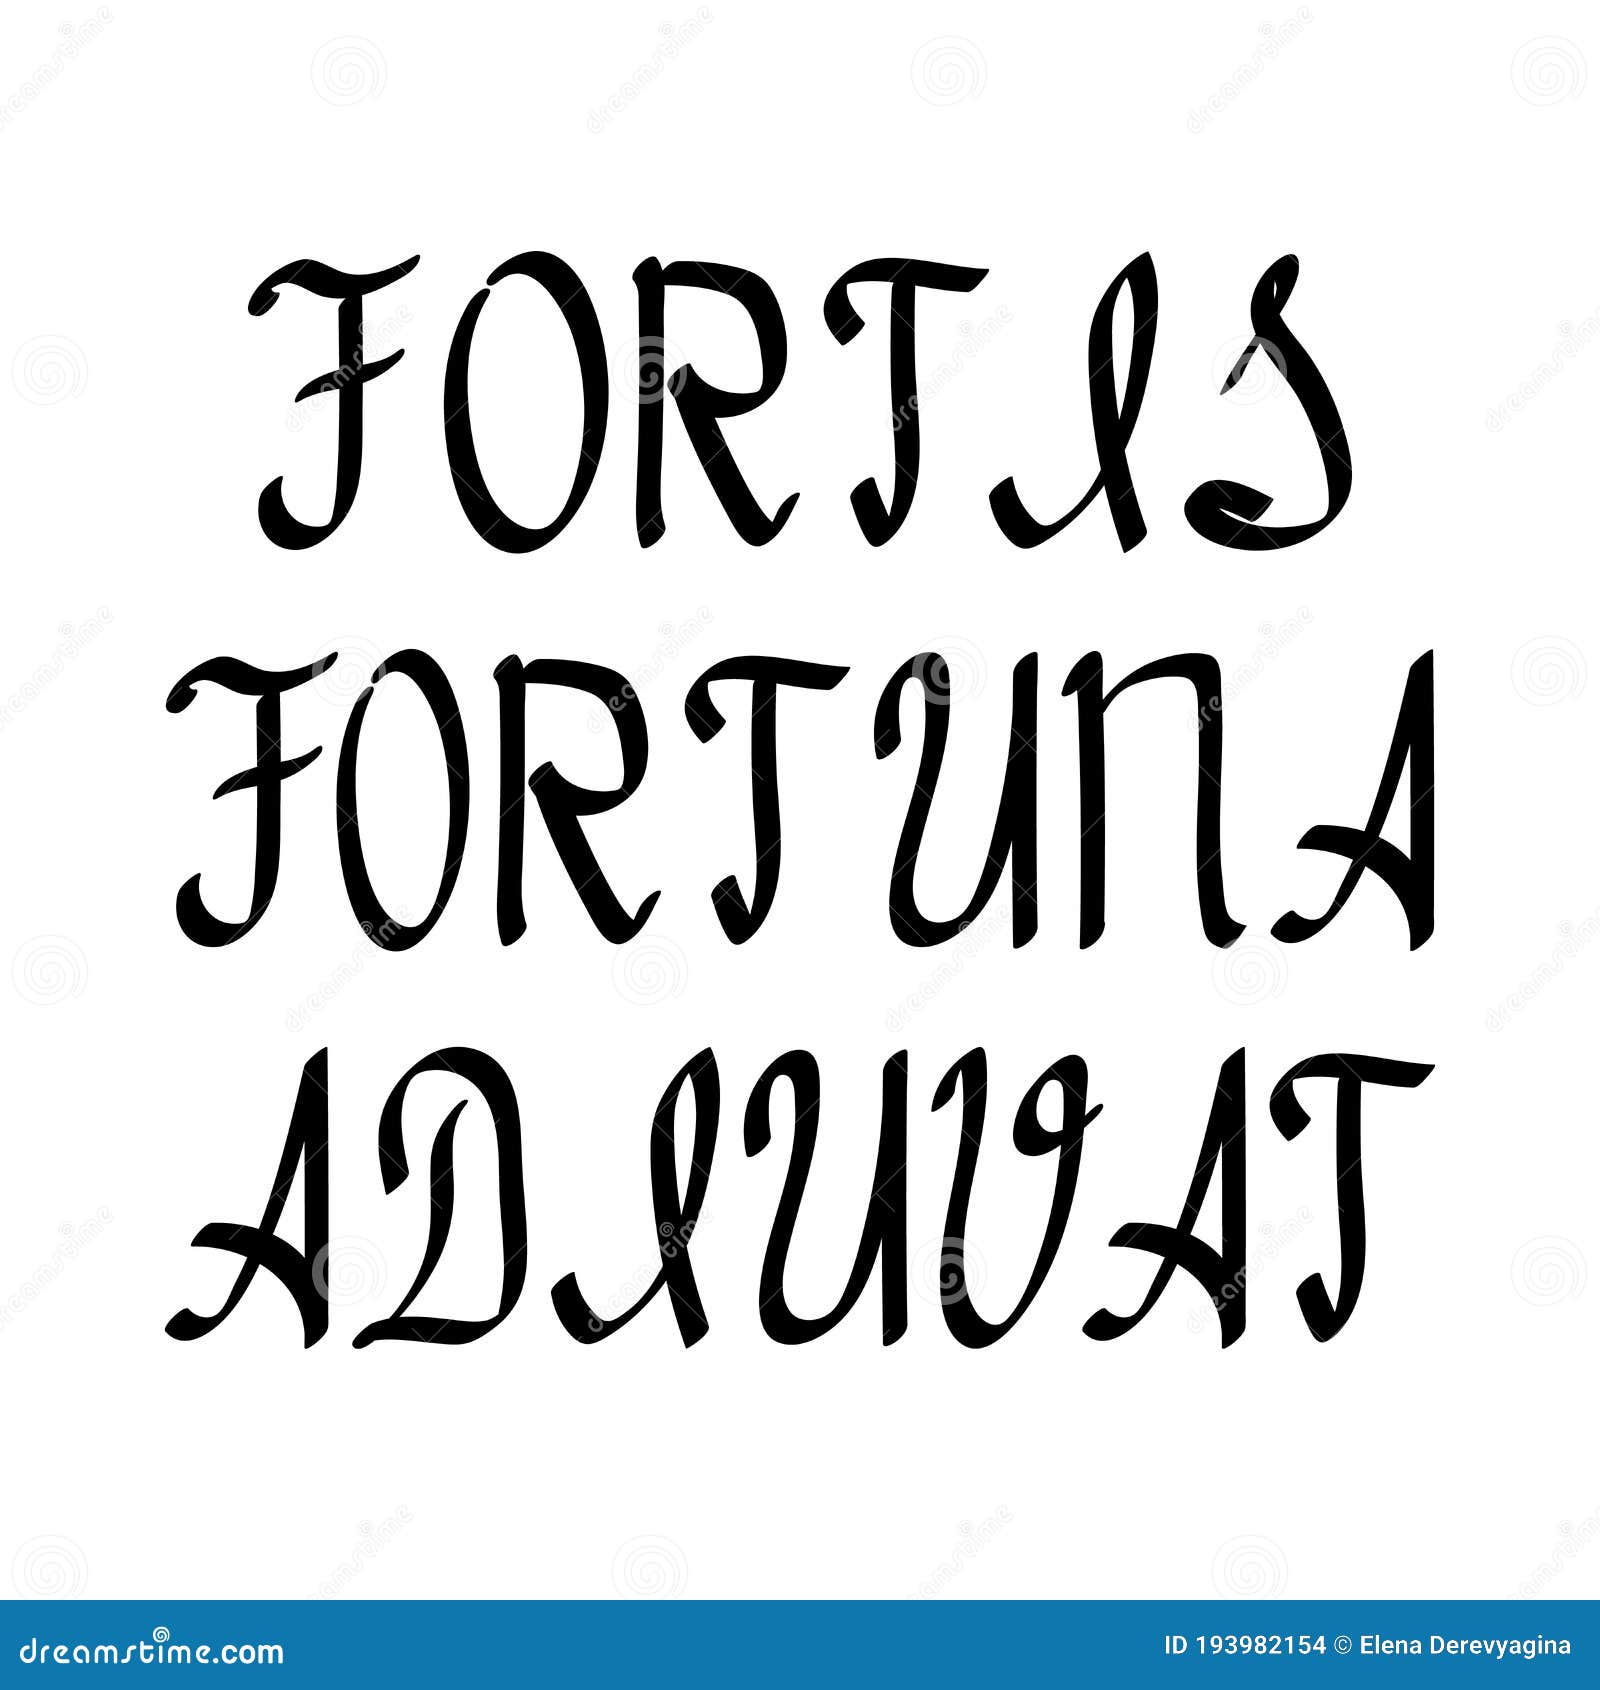 Fortis Fortuna Adiuvat a Saying Meaning Fortune Loves the Bold Inscription  in Latin Letters with a Black Brush Different Thicknes Stock Illustration -  Illustration of font, concept: 193982154